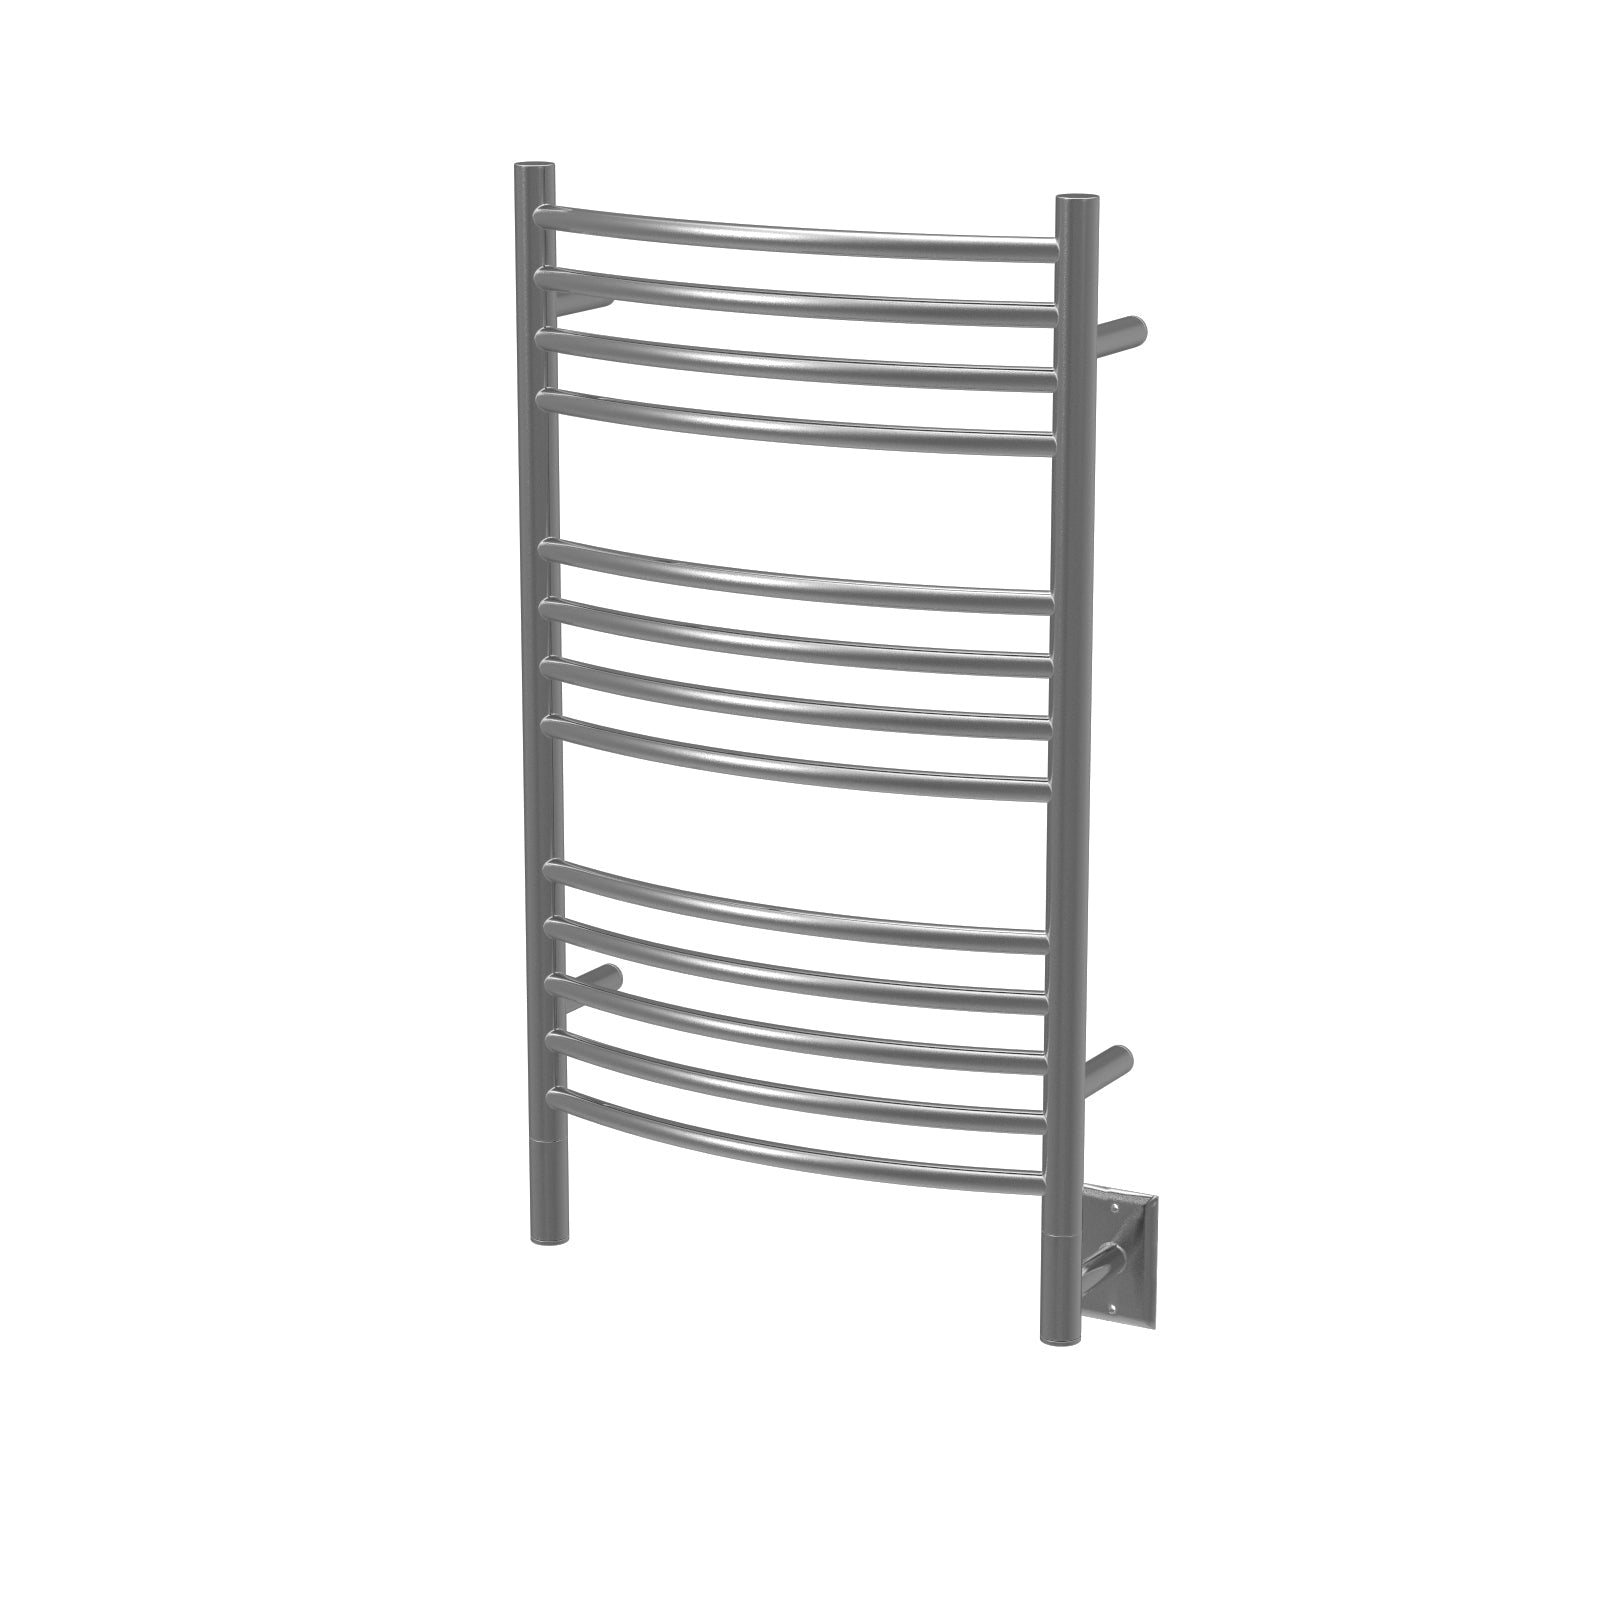 Brushed Towel Warmer, Amba Jeeves C Curved, Hardwired, 13 Bars, W 21" H 36"